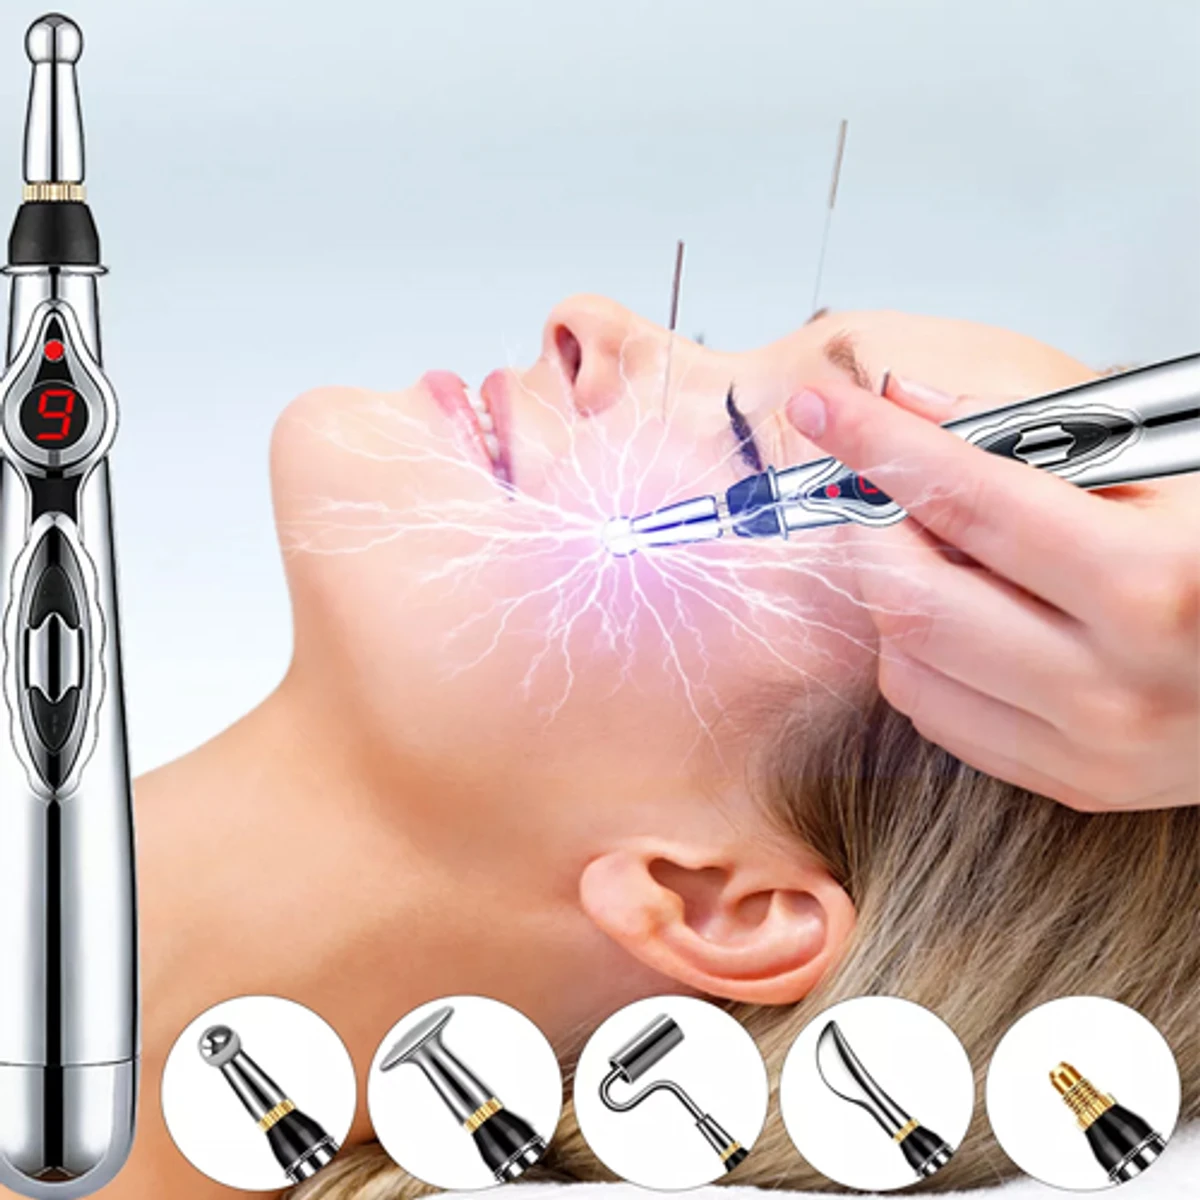 Acupuncture Magnet Therapy Heal Massage Pen